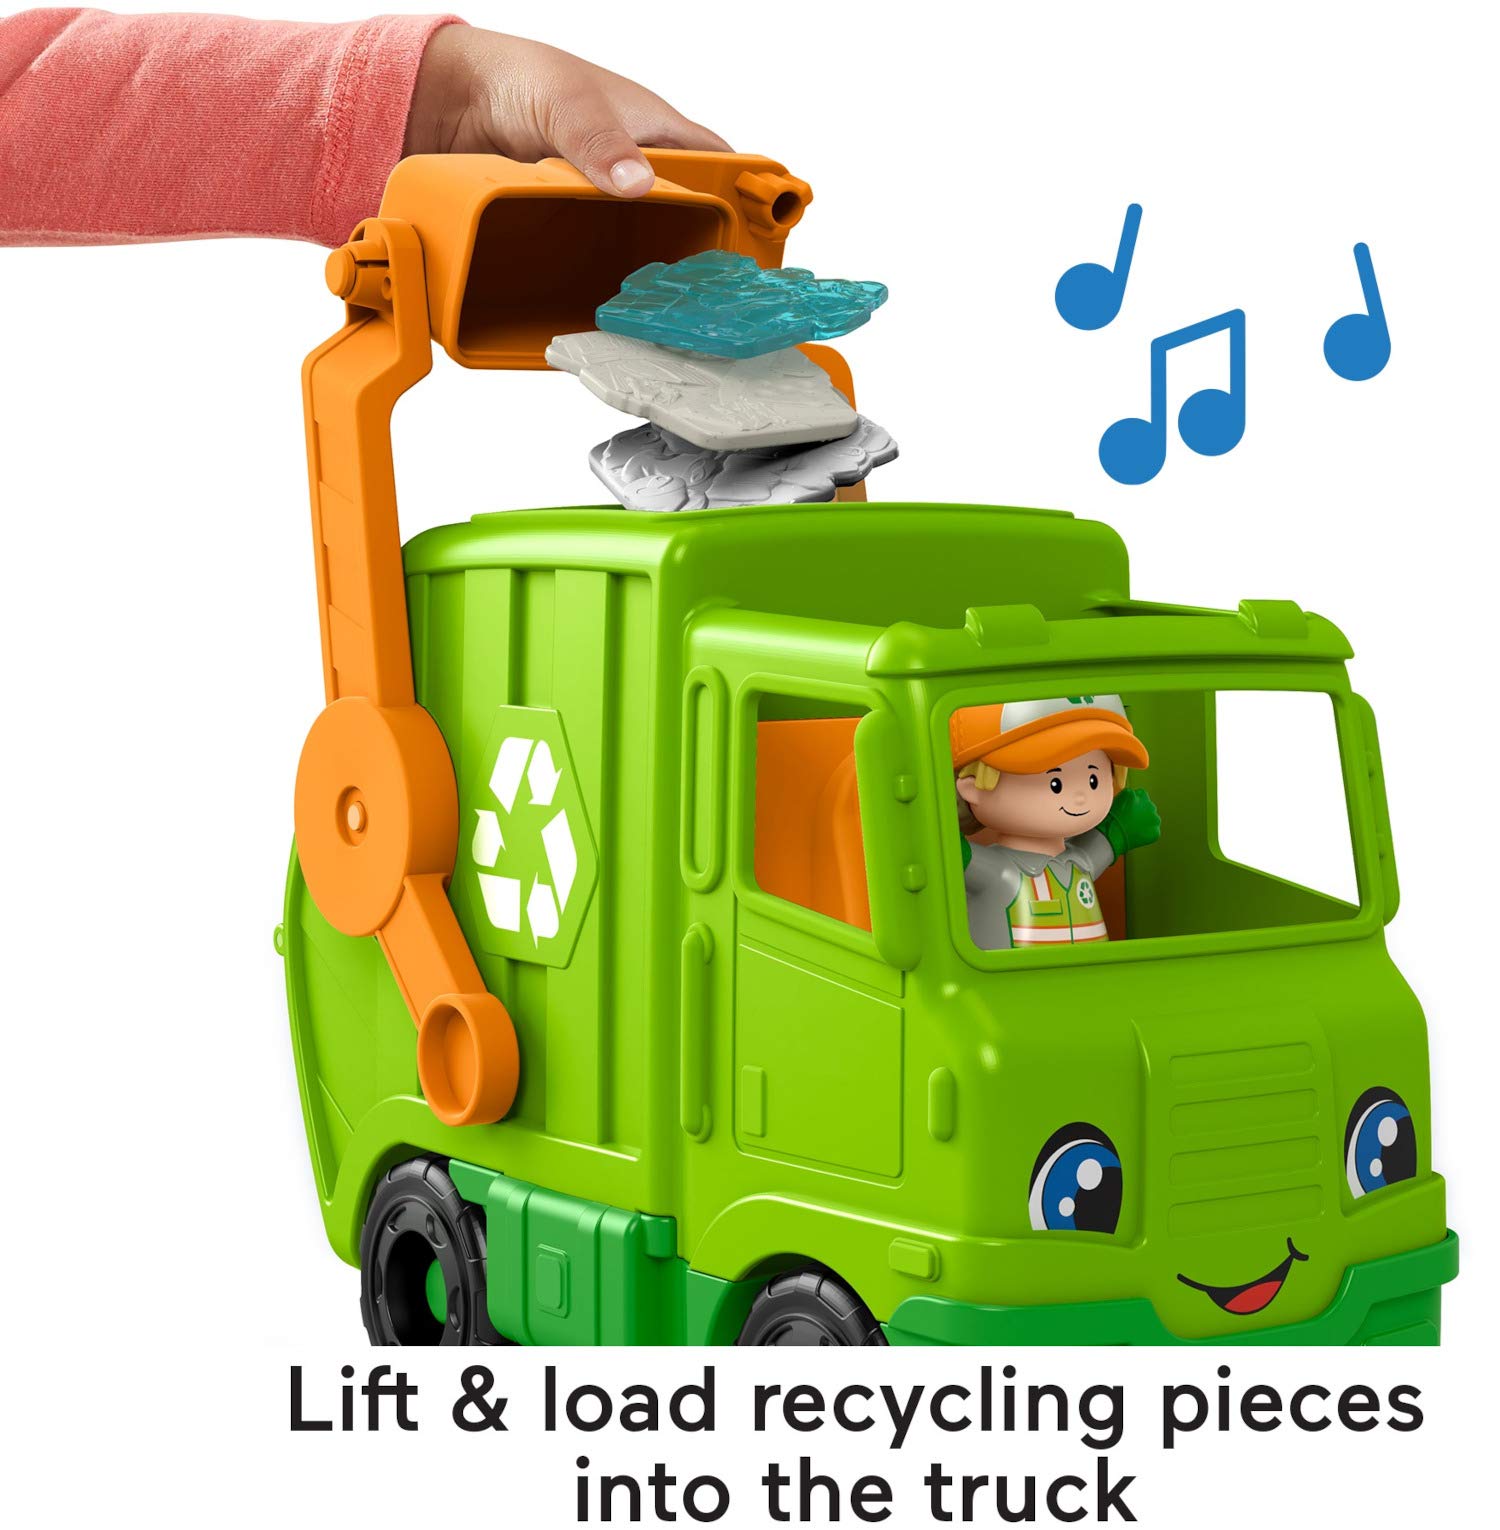 Fisher-Price Little People Recycling Truck, push-along musical toy with figure for toddlers and preschool kids ages 1 to 5 years